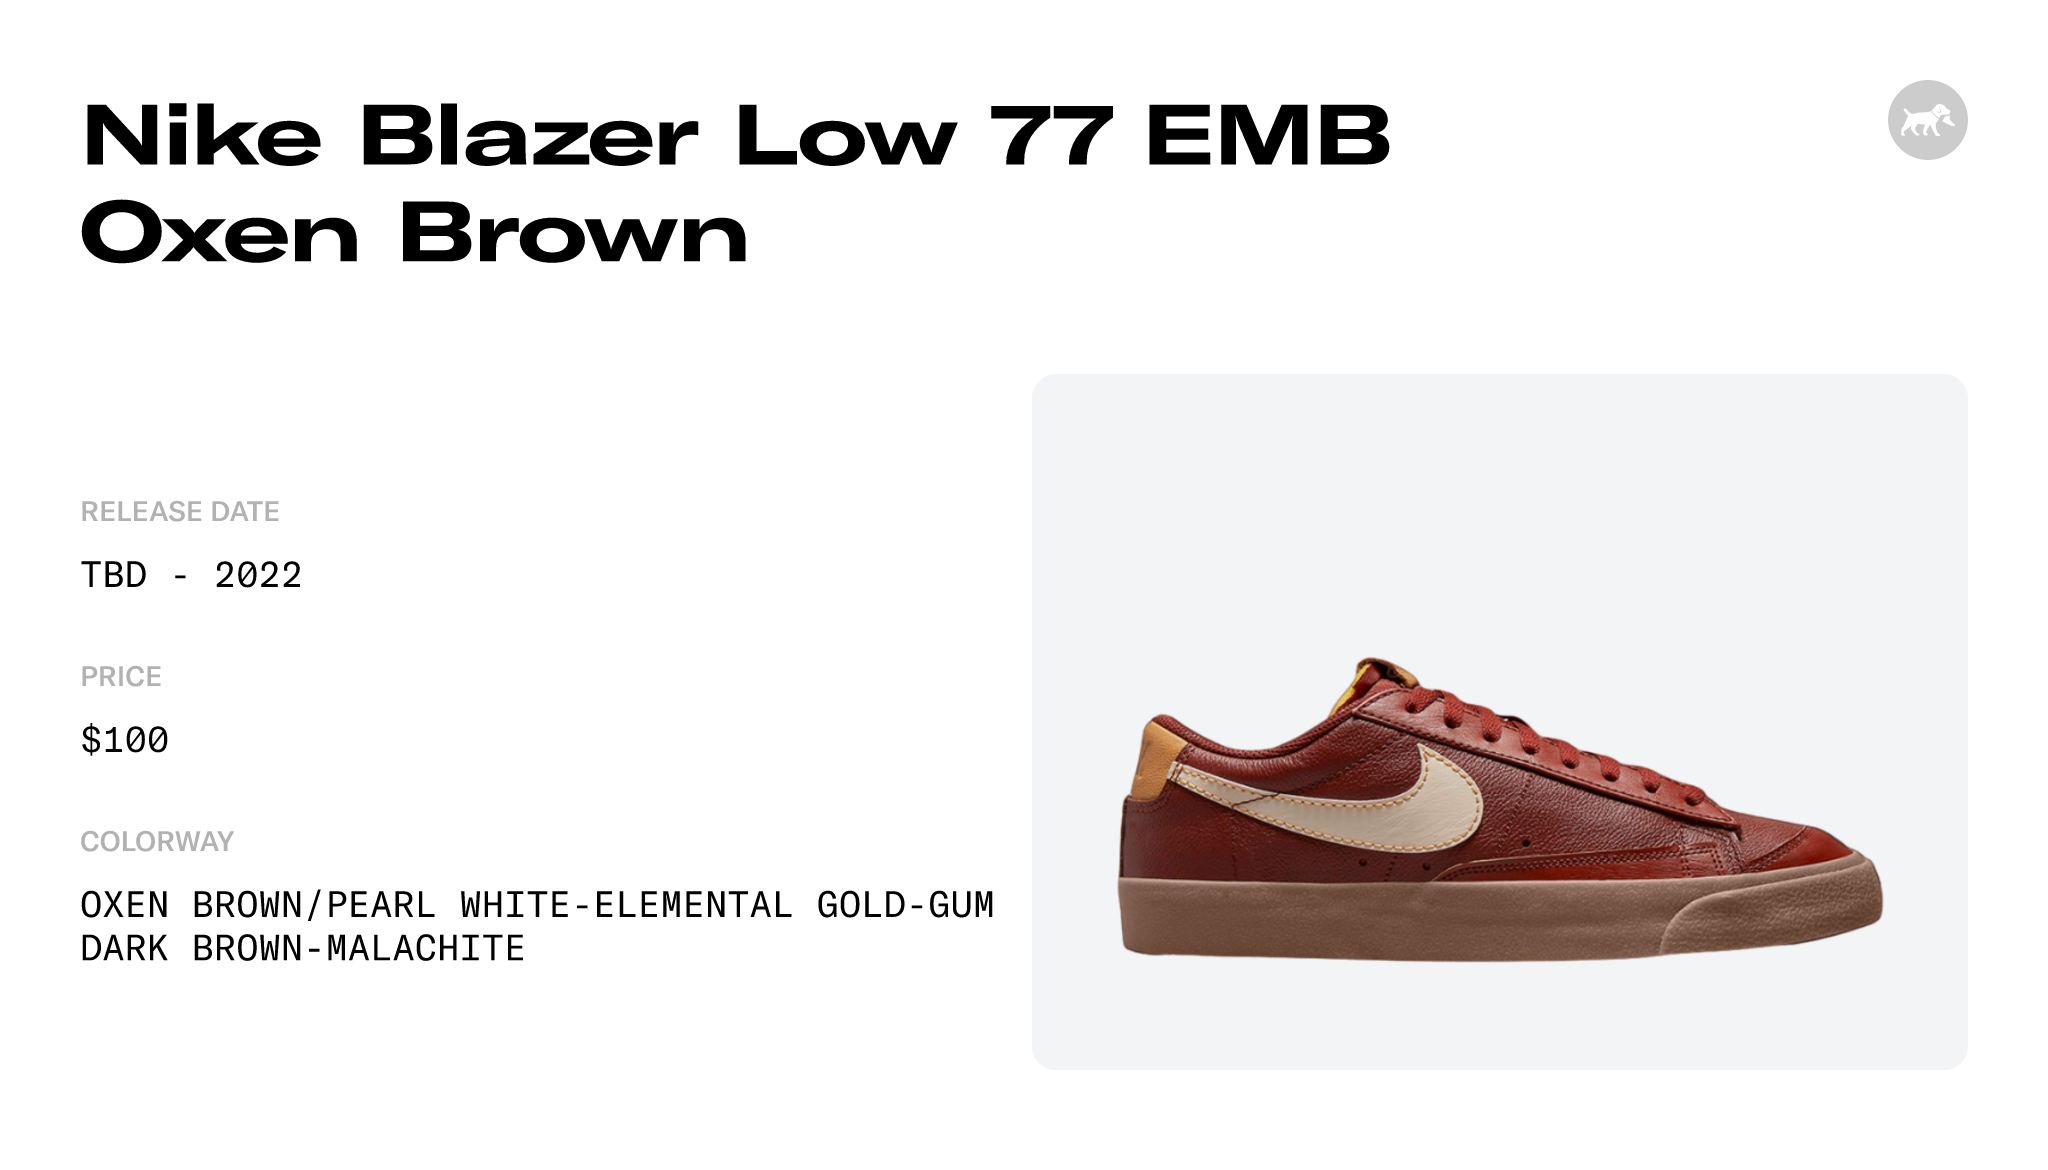 Nike Blazer Low 77 EMB Oxen Brown - DQ7670-200 Raffles and Release